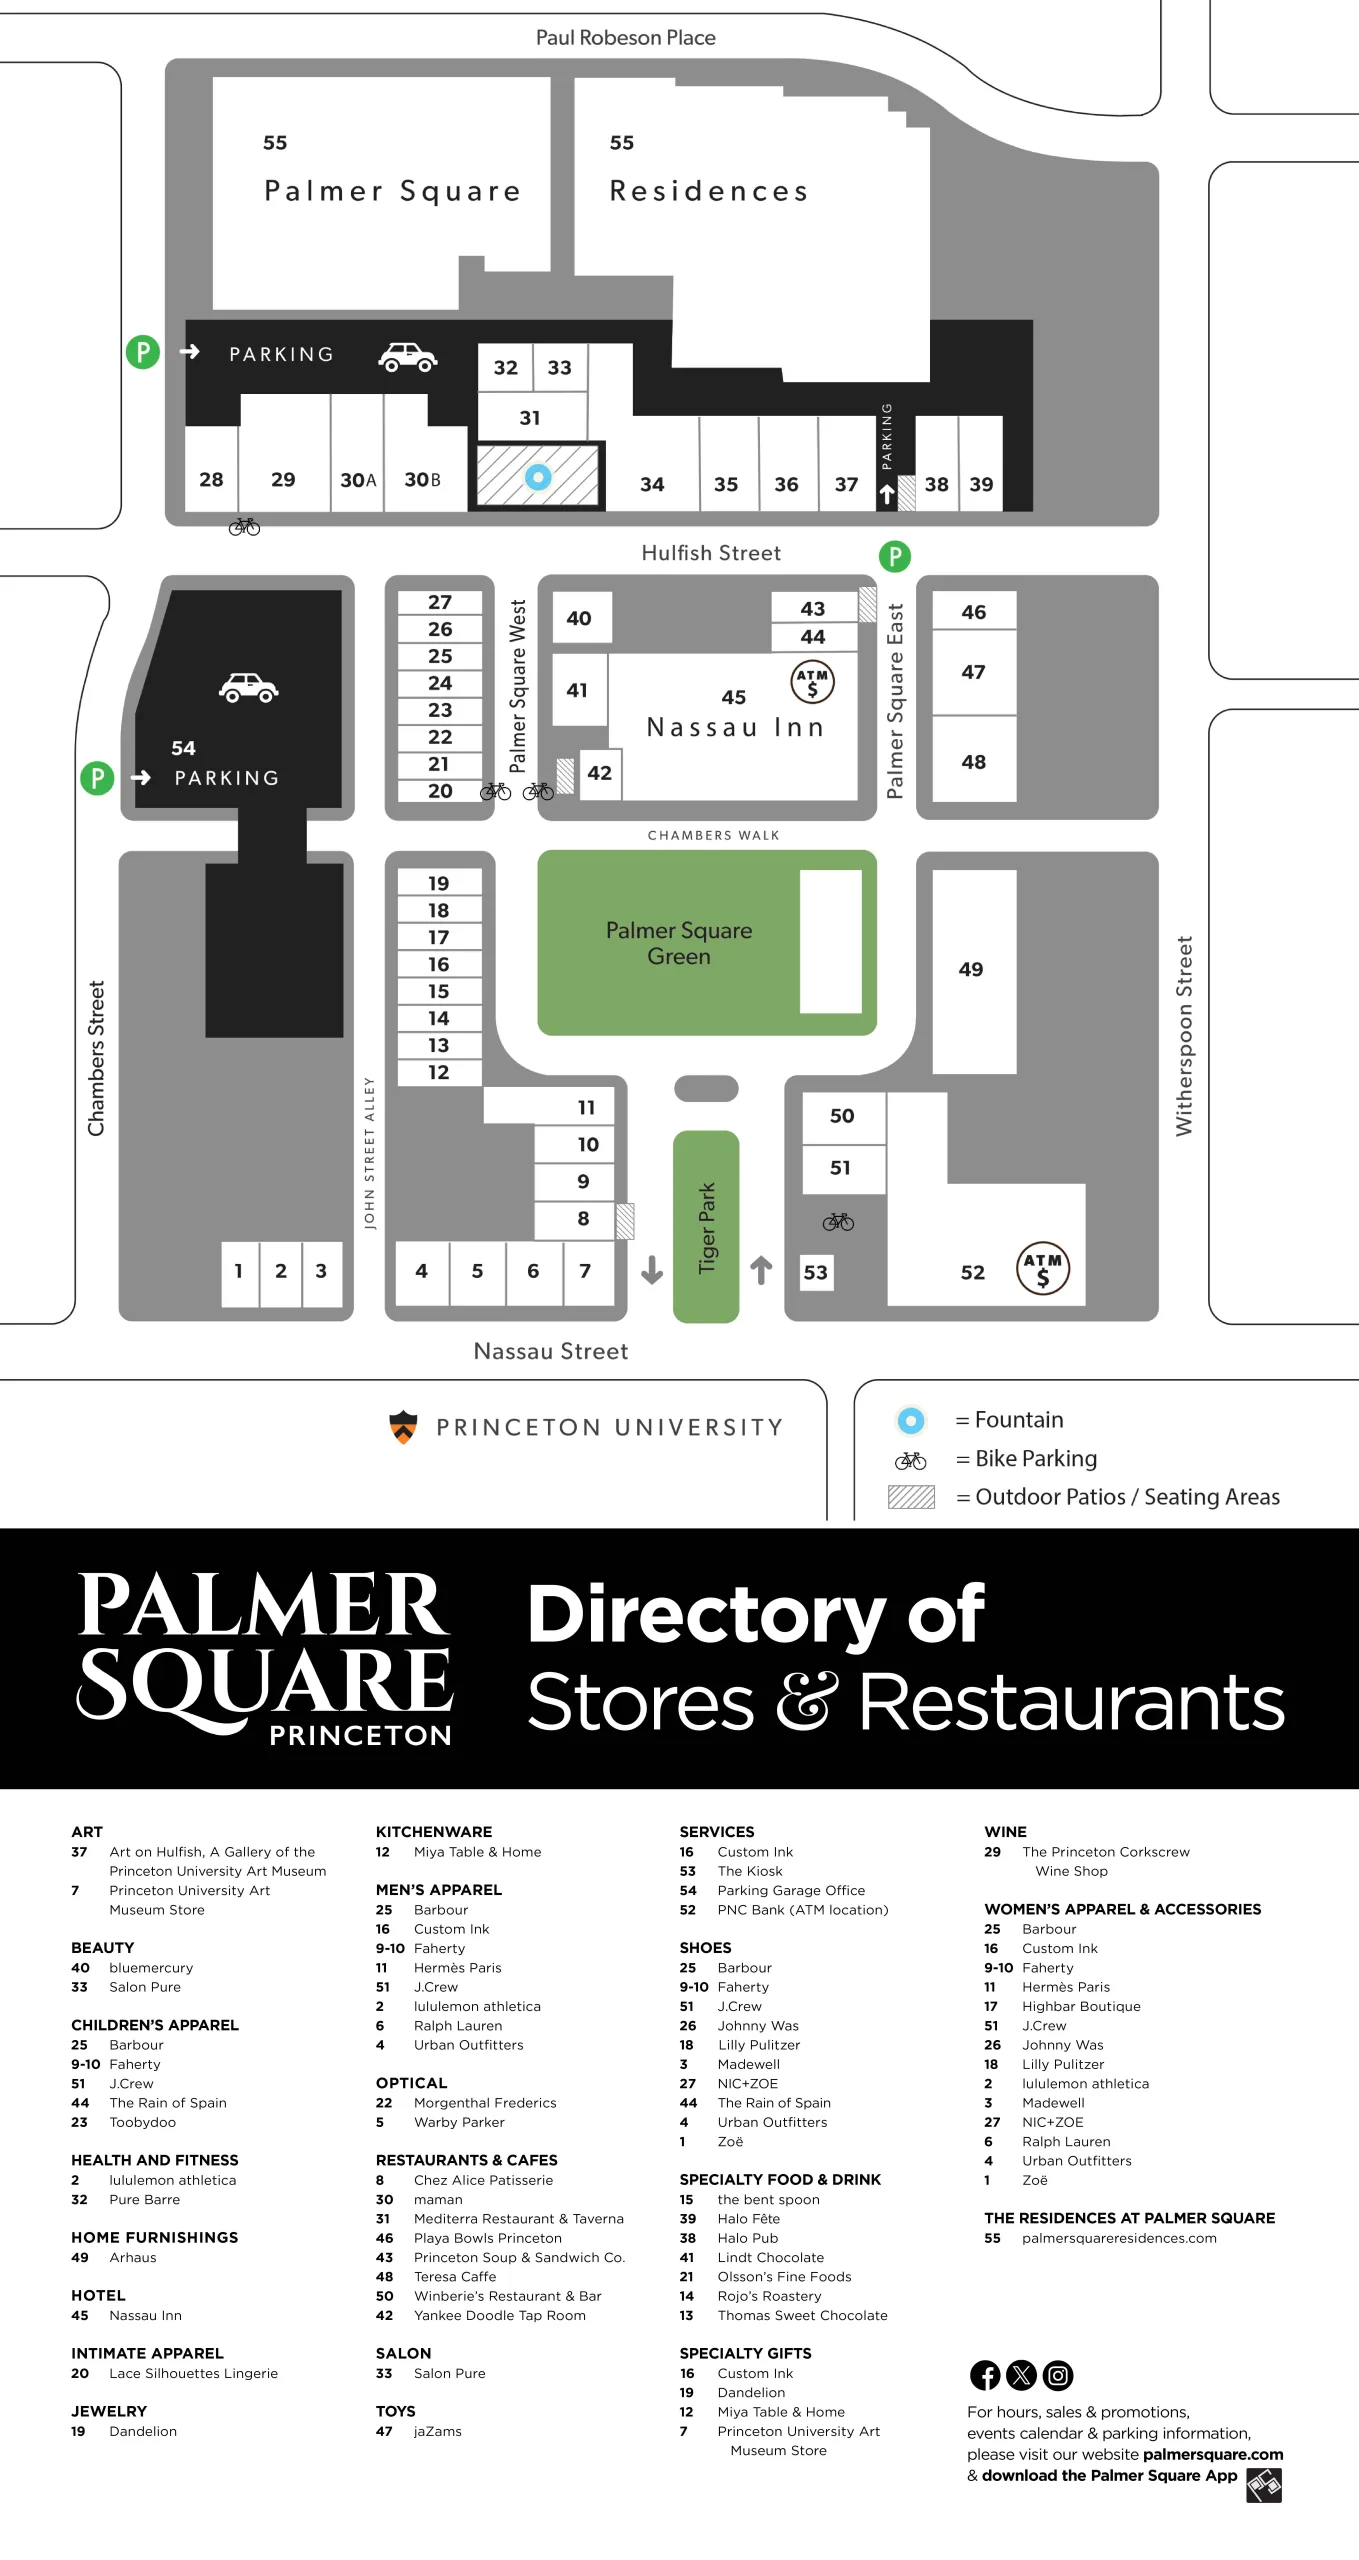 directory of palmer square stores and restaurants